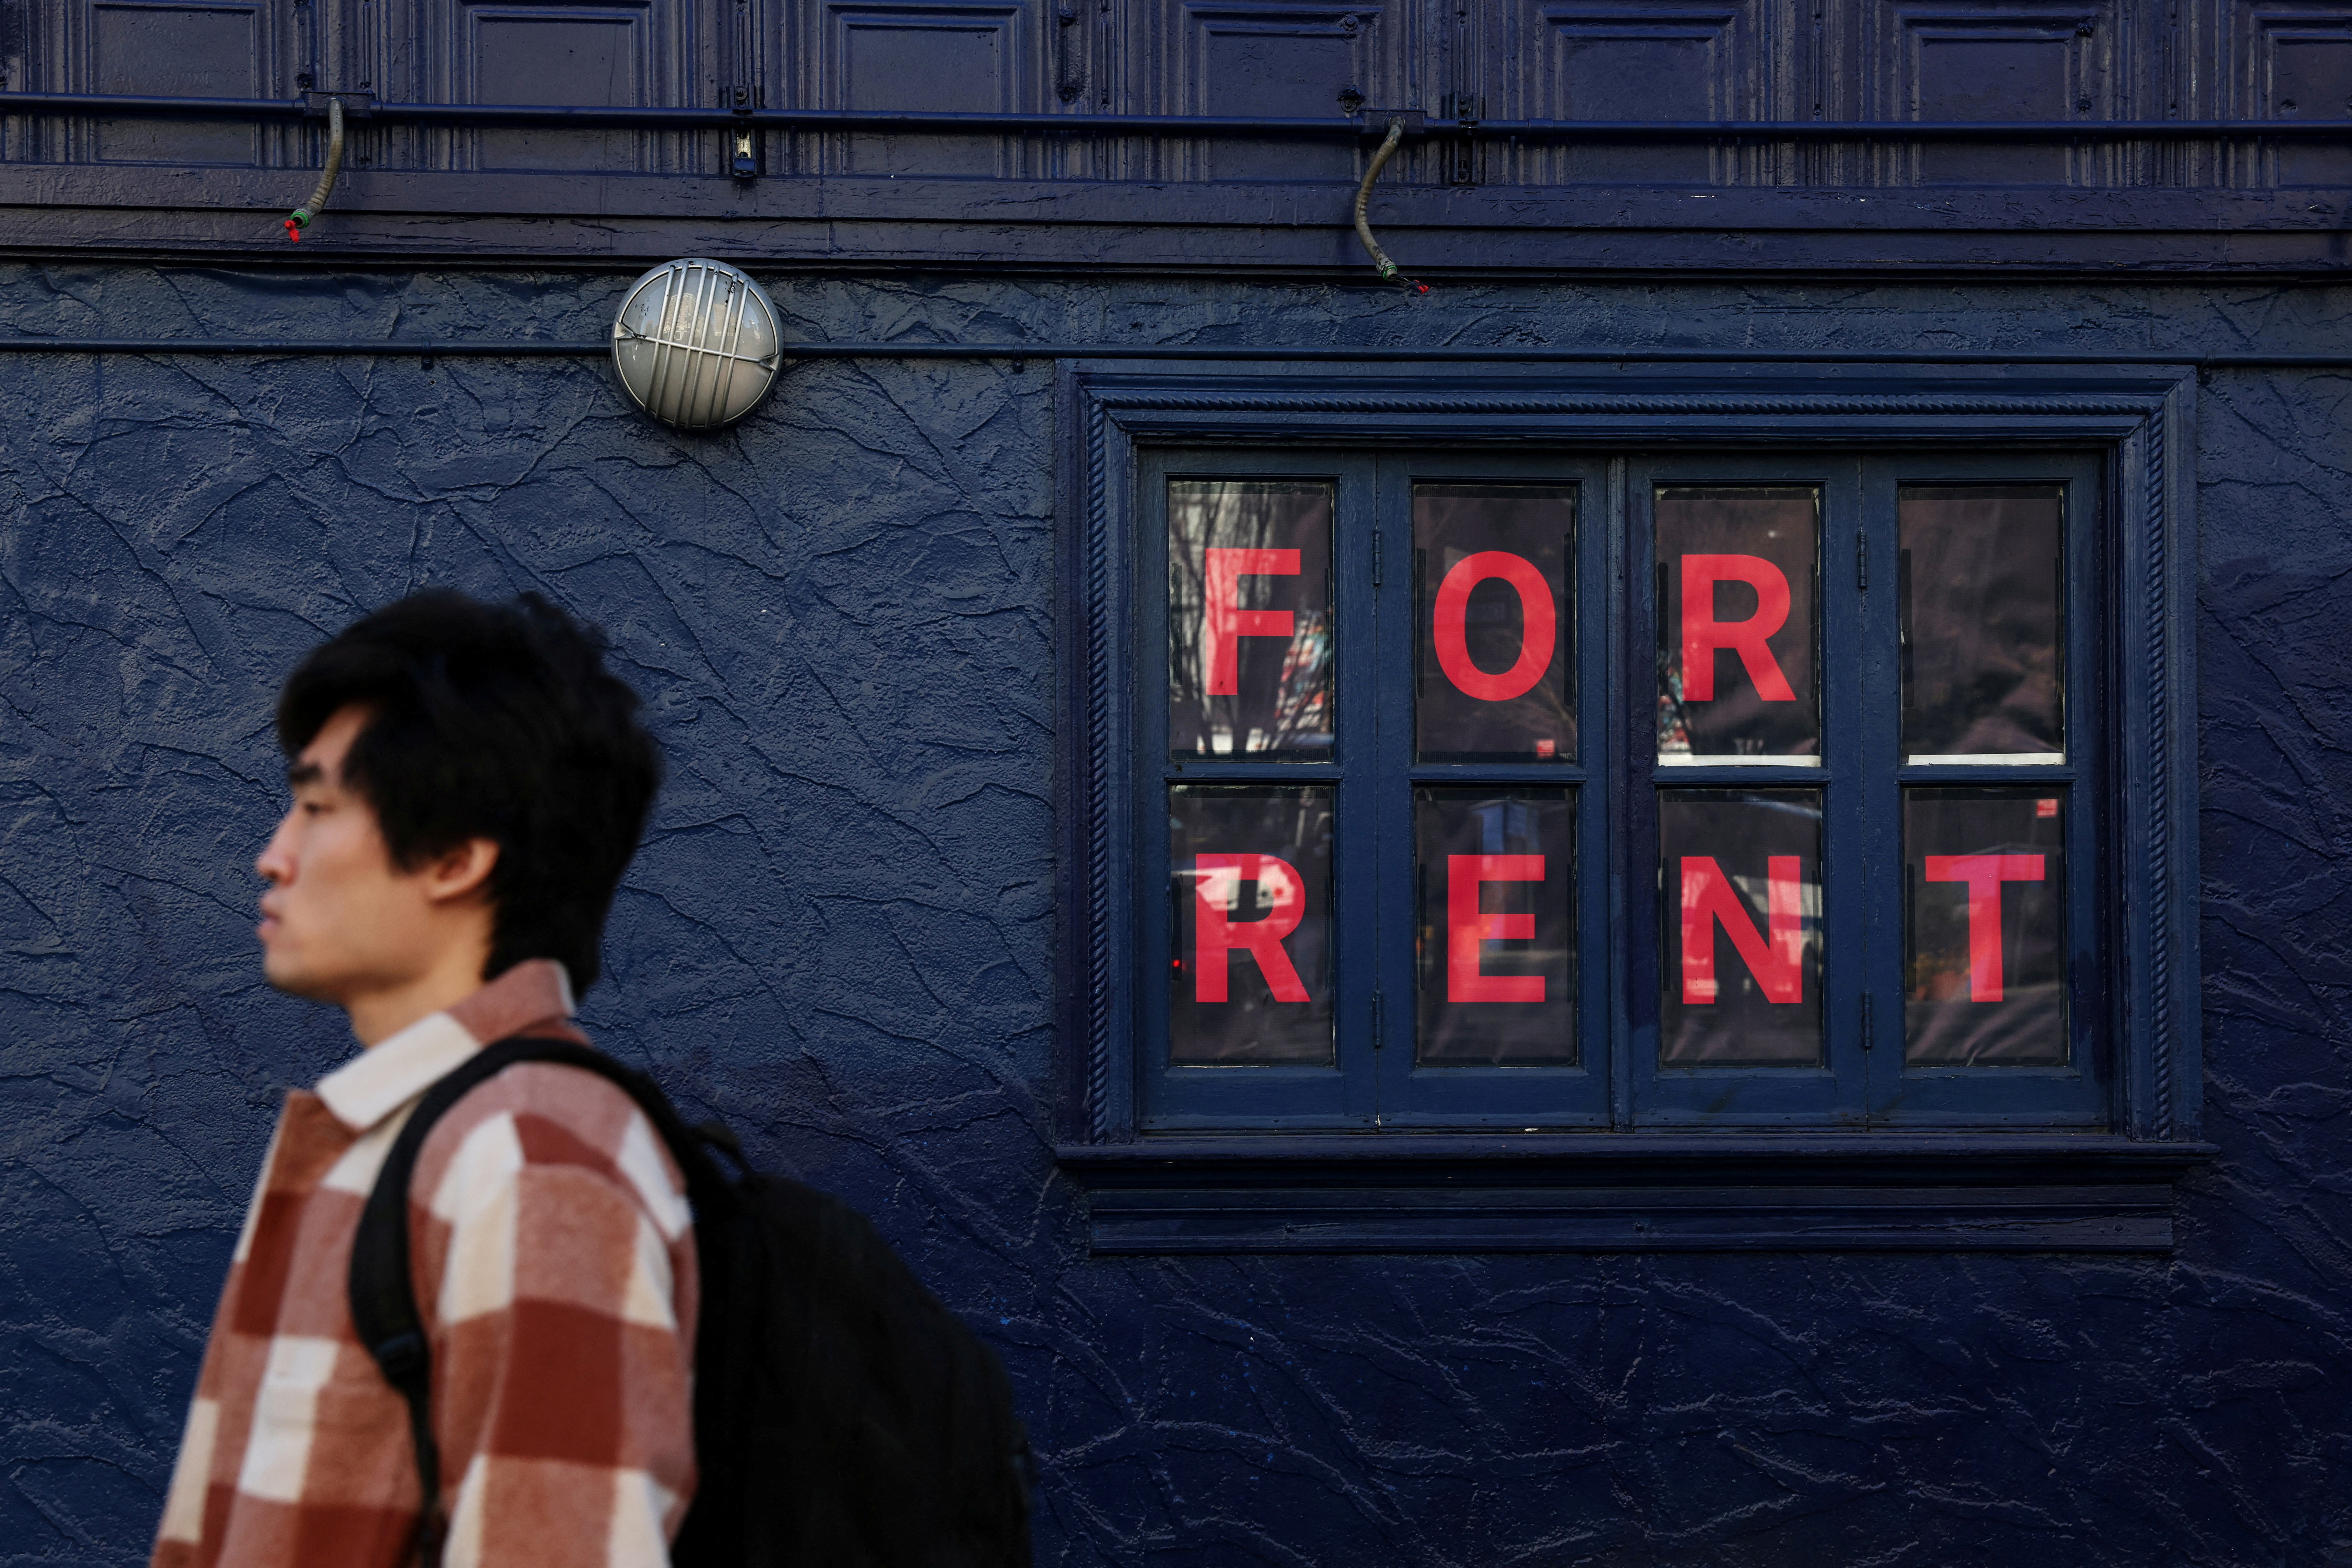 A man walks by as sign advertising real estate for rent in the SoHo area of New York City